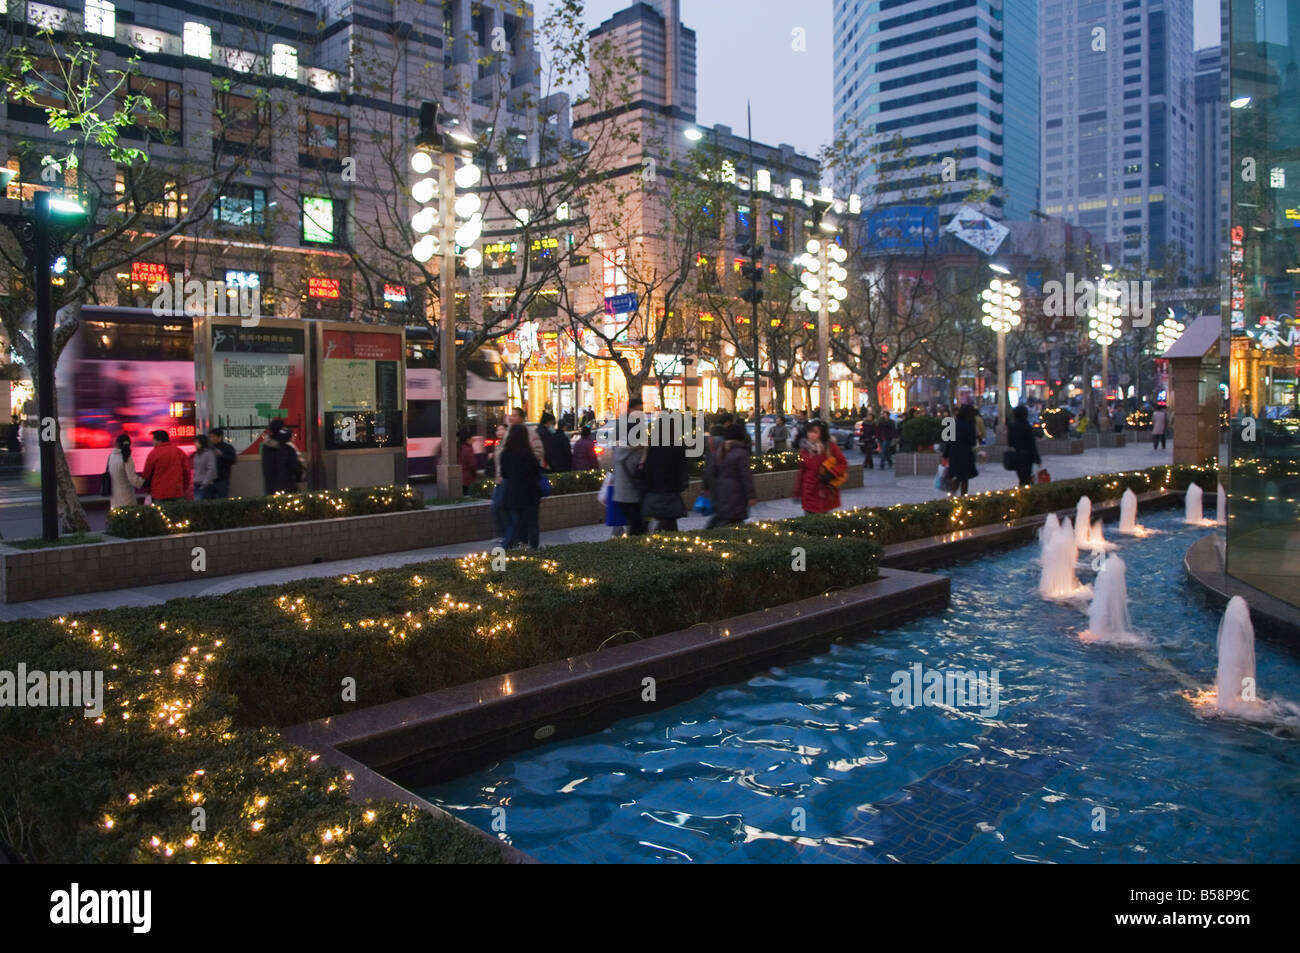 Modern displays and illuminations around a fountain in the French Concession area, Shanghai, China Stock Photo